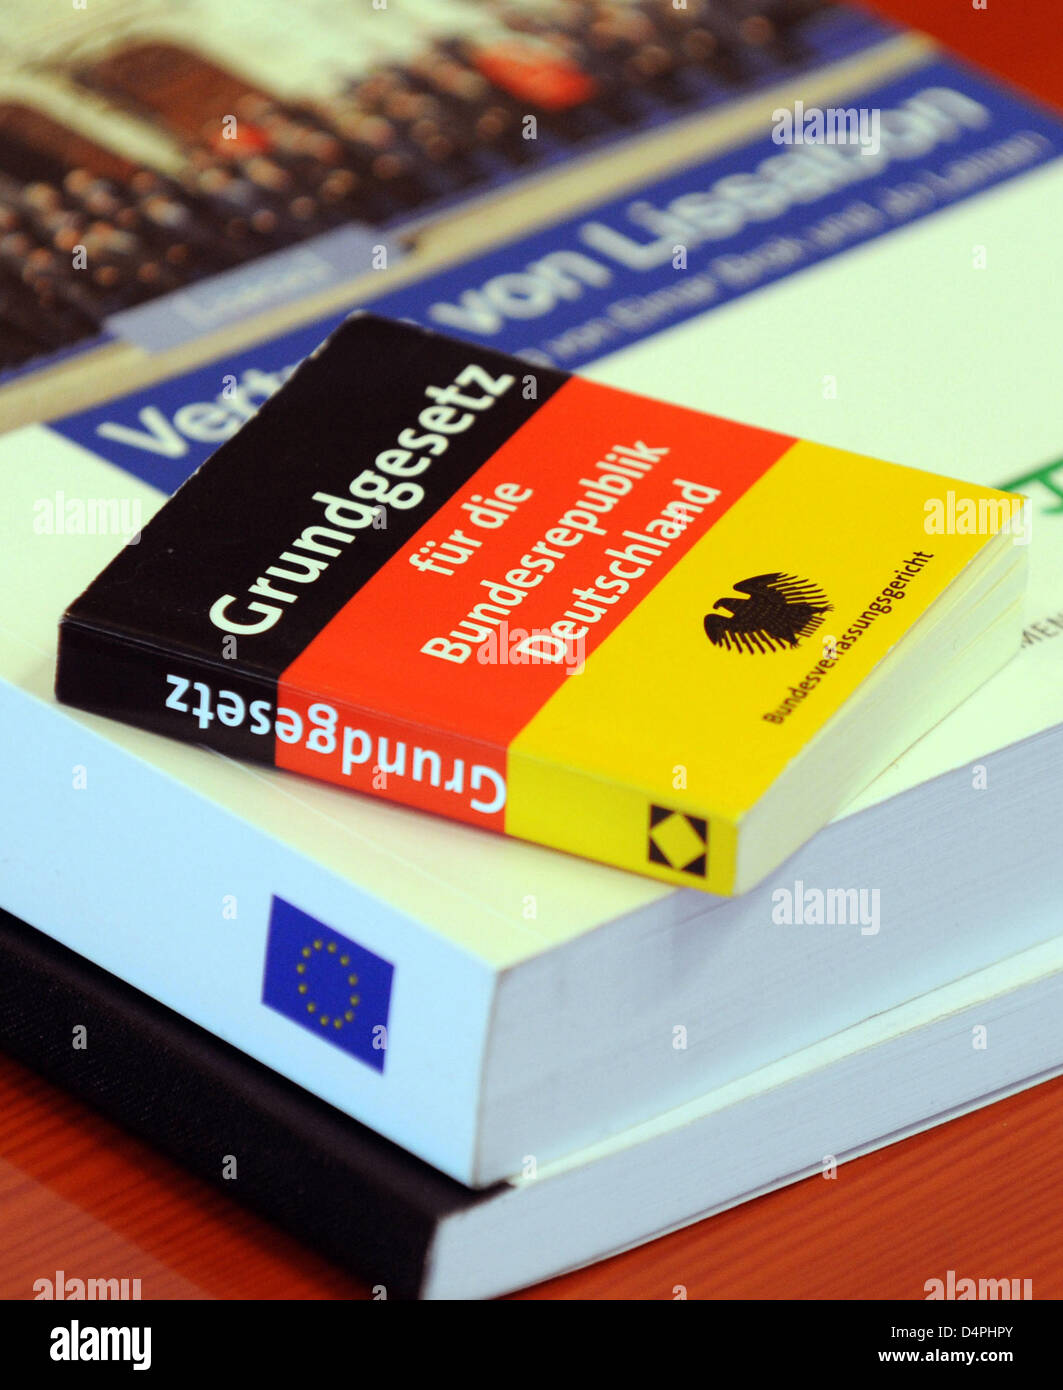 A miniature issue of the German Basic Law lies on top of an issue of the EU?s Lisbon Treaty at the Federal Constitutional Court (BVerfG) in Karlsruhe, Germany, 30 June 2009. The court demanded changes to German federal legislation before the Lisbon Treaty could be ratified. Germany?s act of sanctioning was compatible with Basic Law, yet parliament?s right to participation had to be Stock Photo